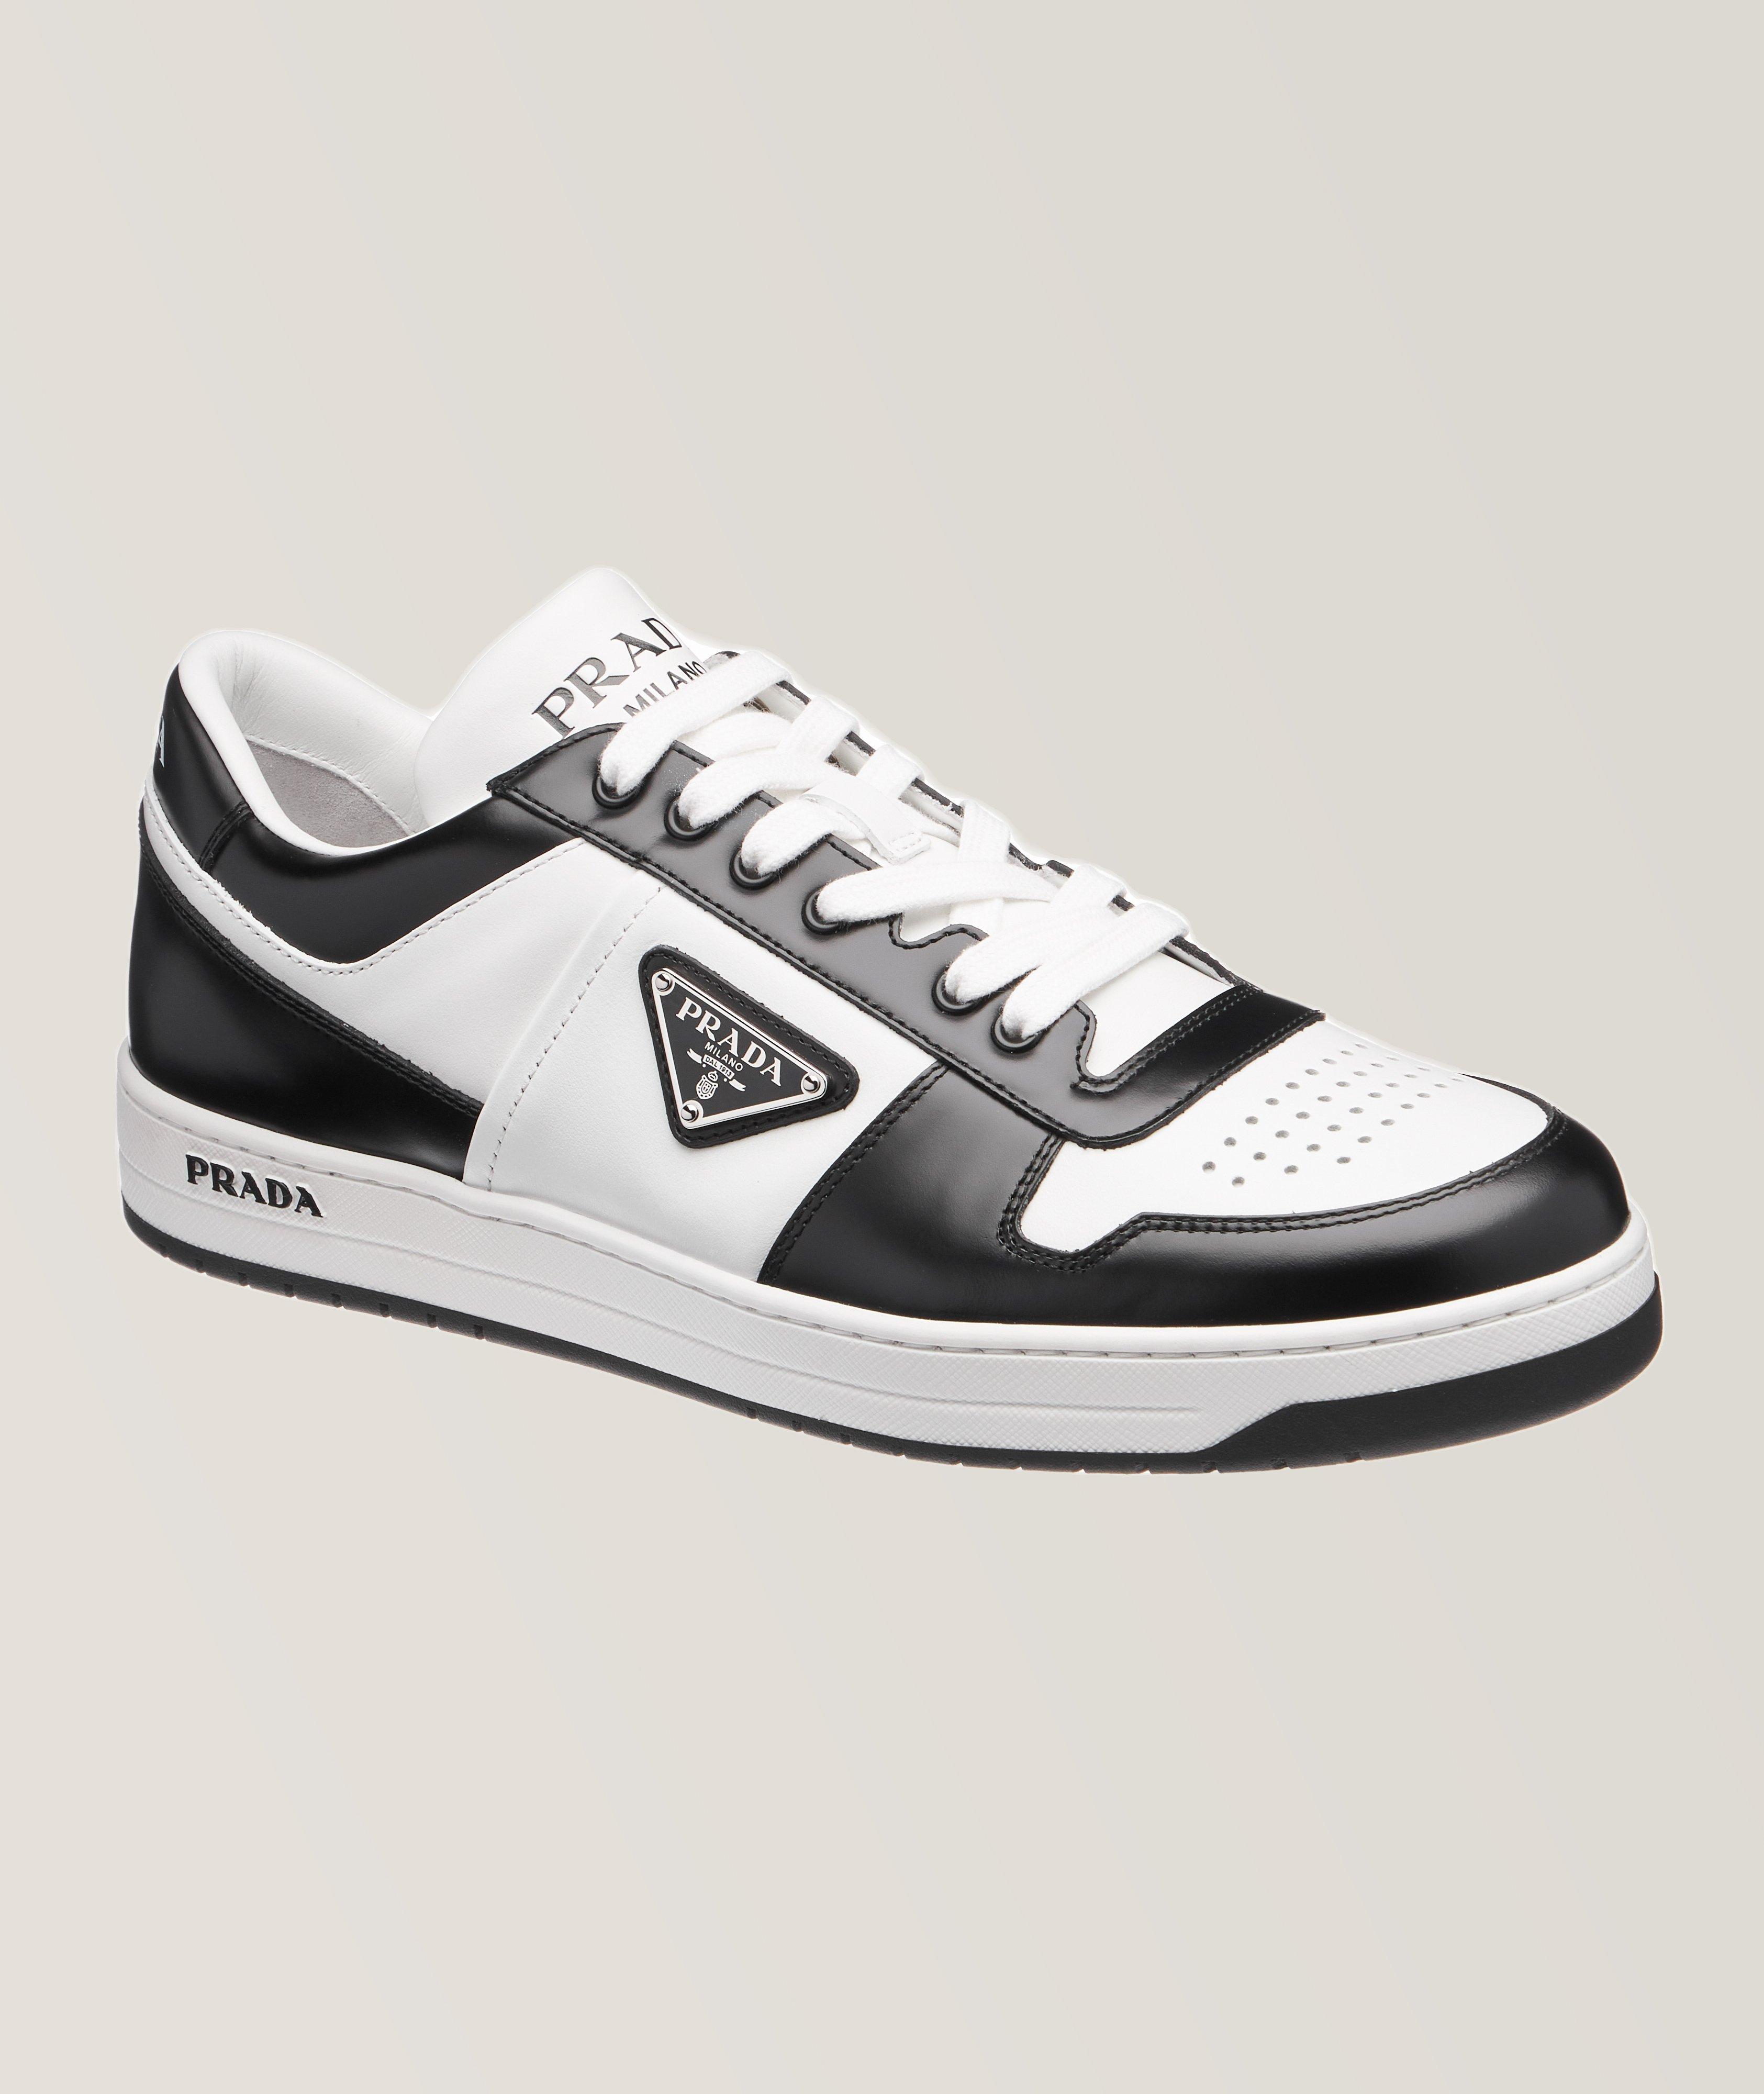 Downtown Leather Sneakers image 0